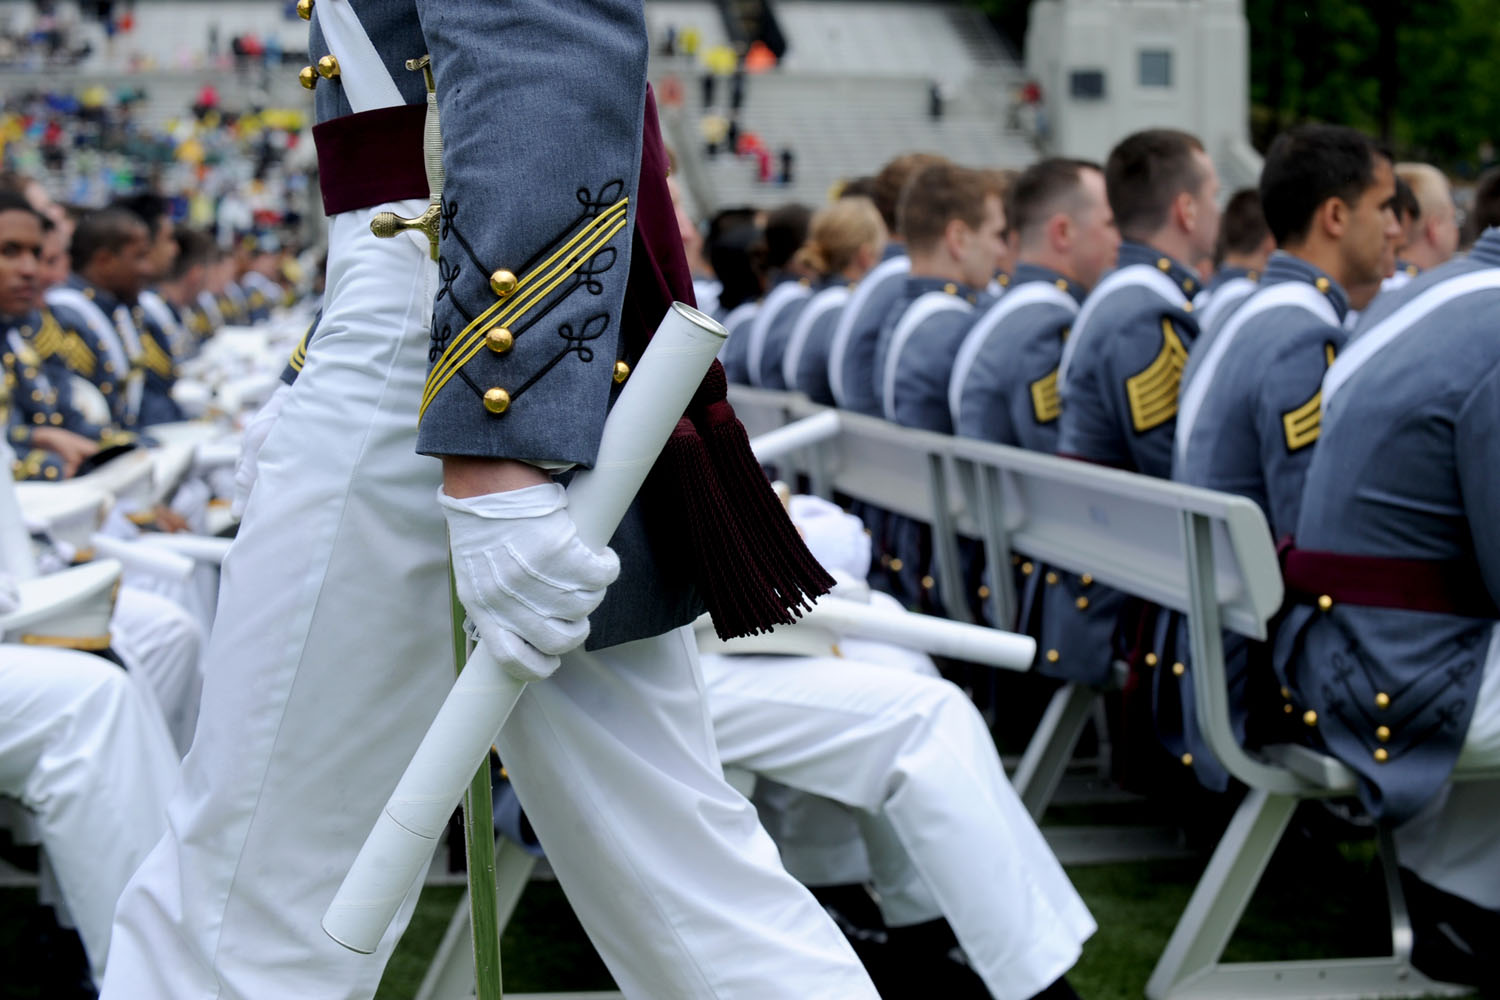 May 25, 2013. Graduating cadets listen at the United States Military Academy at West Point (USMA) during the 215 commencement ceremony in West Point, New York. Secretary of Defense Chuck Hagel delivered the commencement speech for the class of 2013.